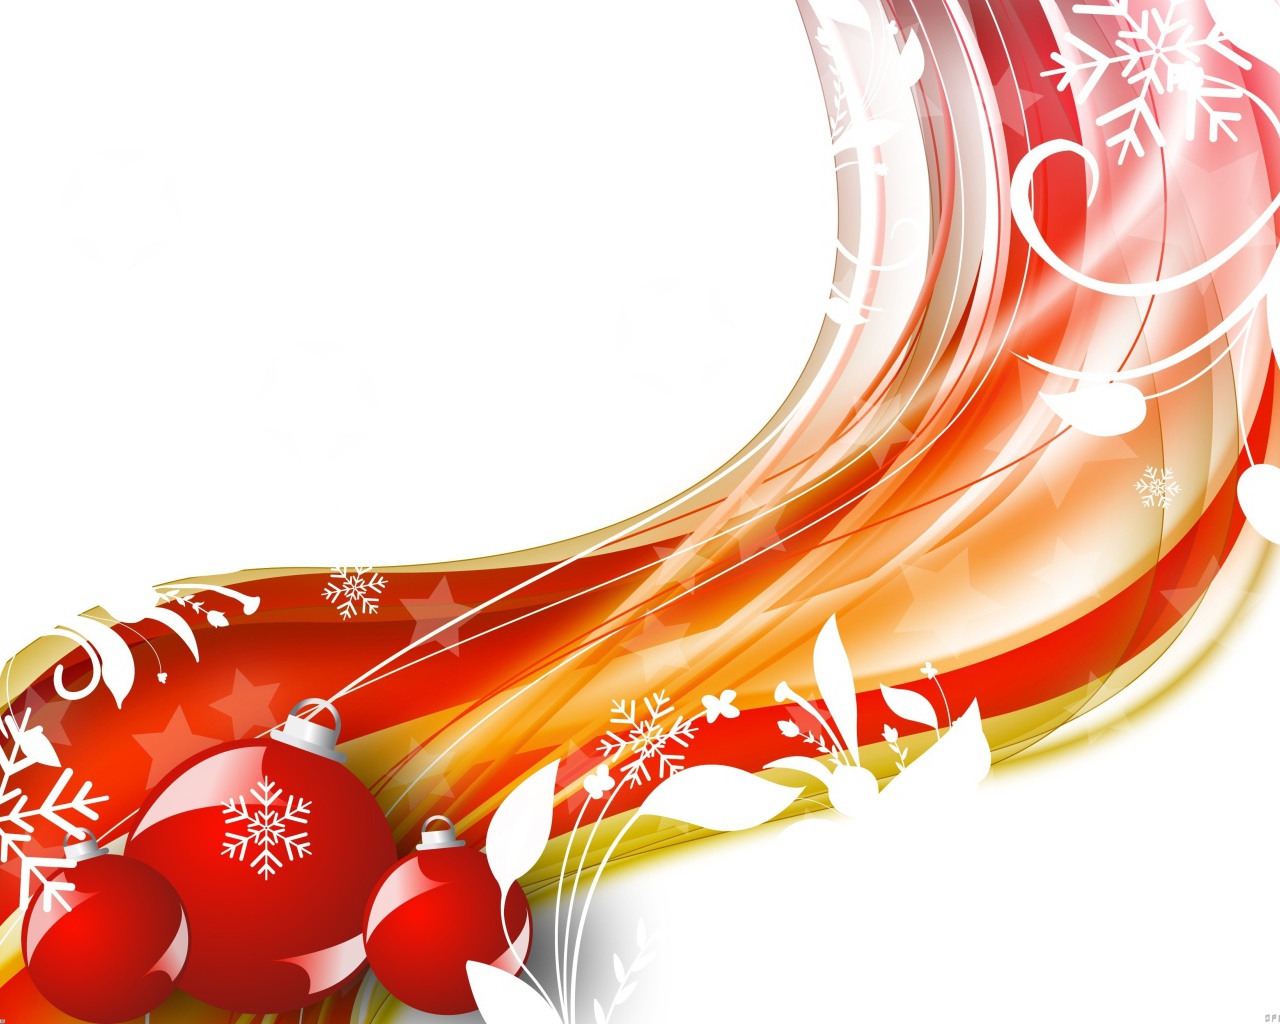 Beautiful red and white picture on Christmas